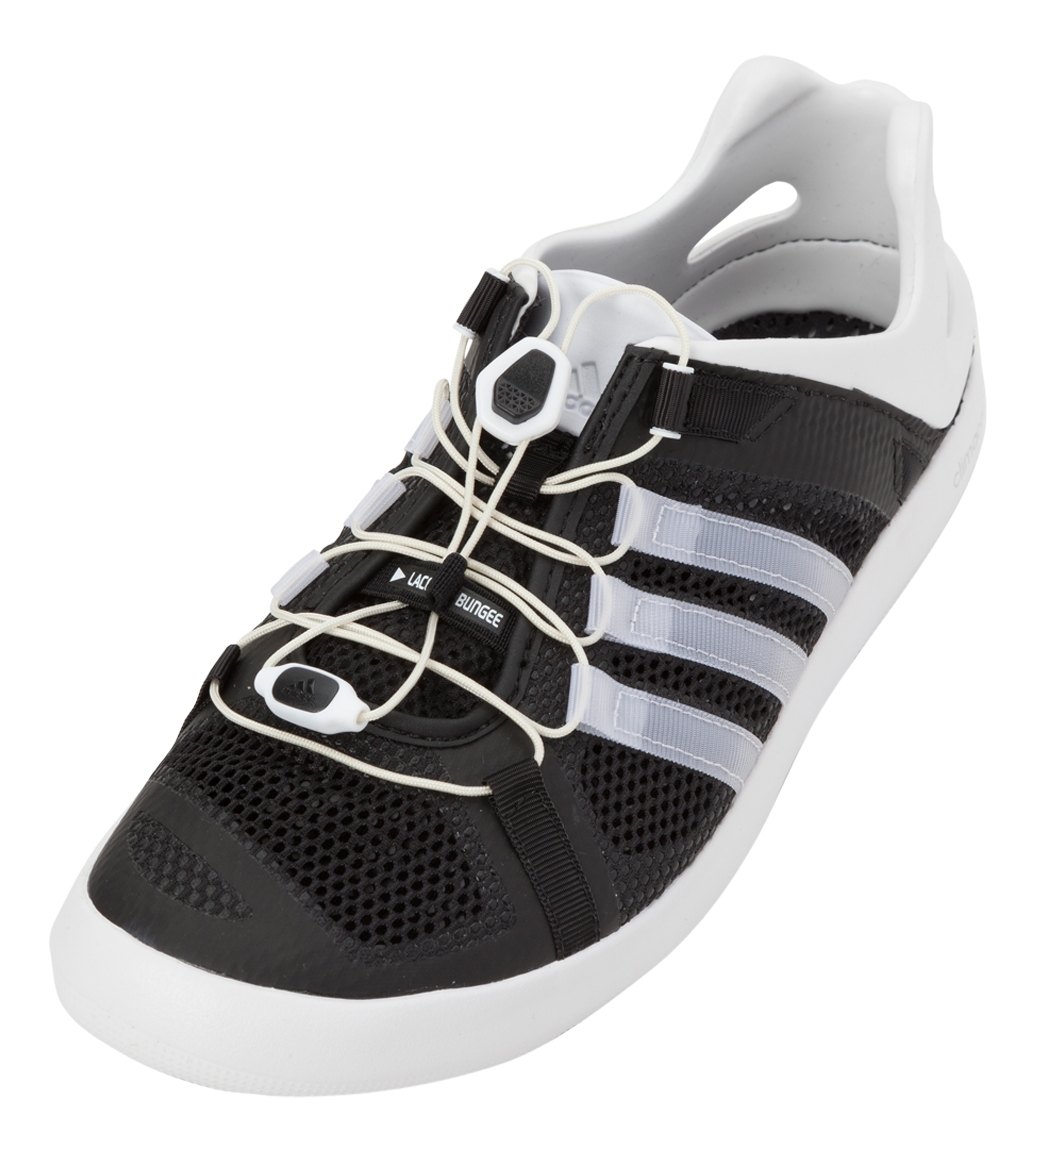 adidas men's climacool boat breeze water